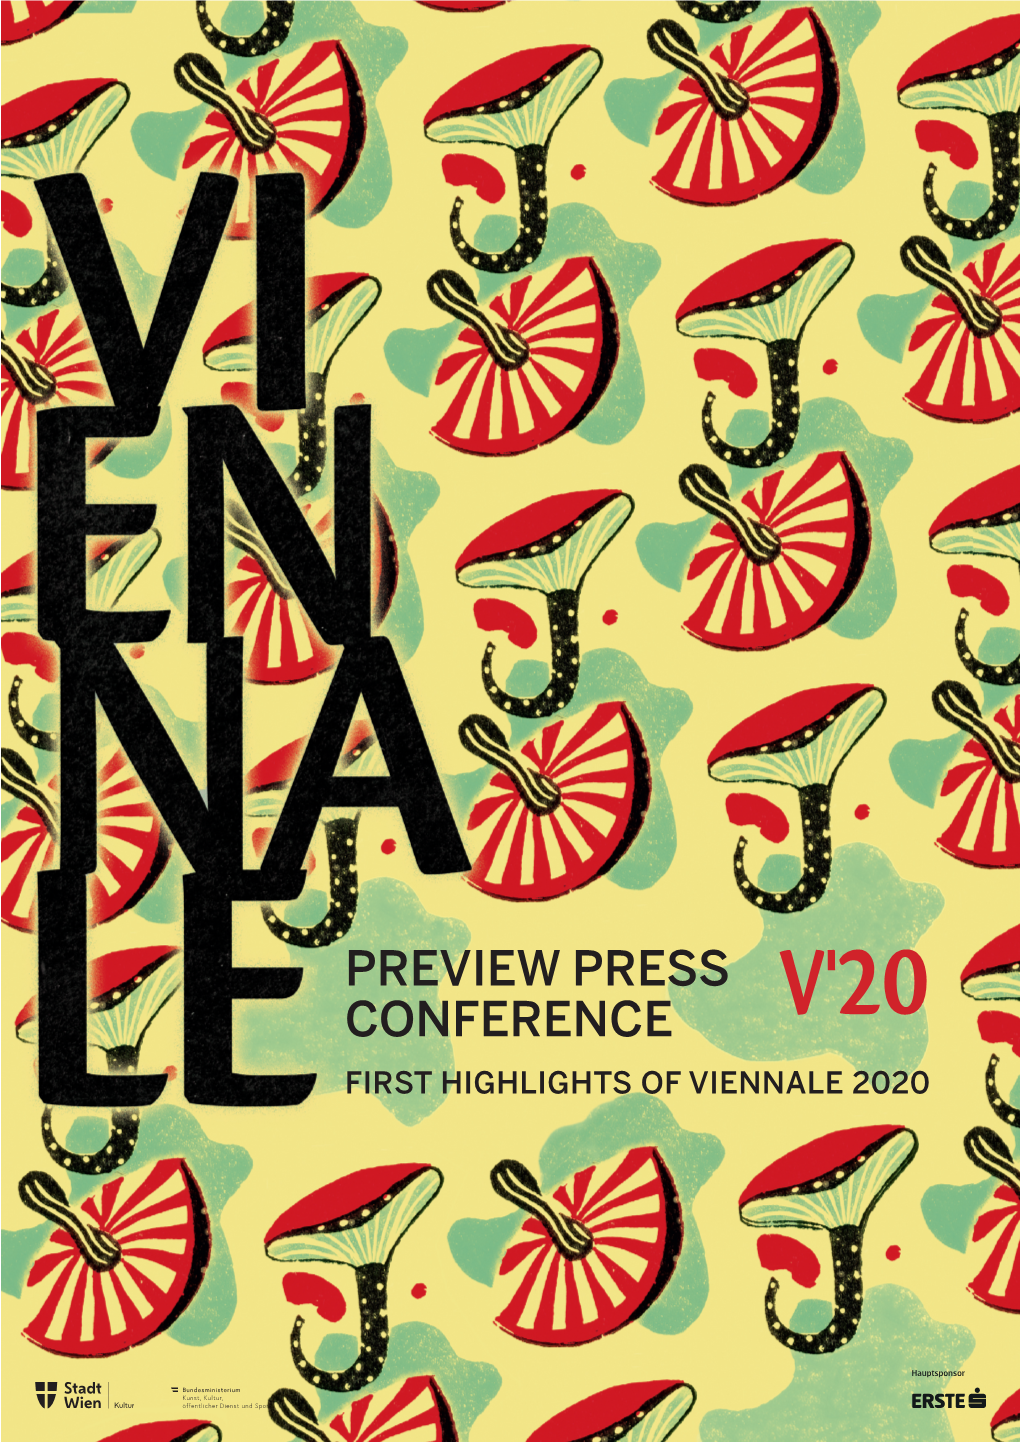 PREVIEW PRESS CONFERENCE FIRST HIGHLIGHTS of VIENNALE 2020 Vienna, August 20, 2020